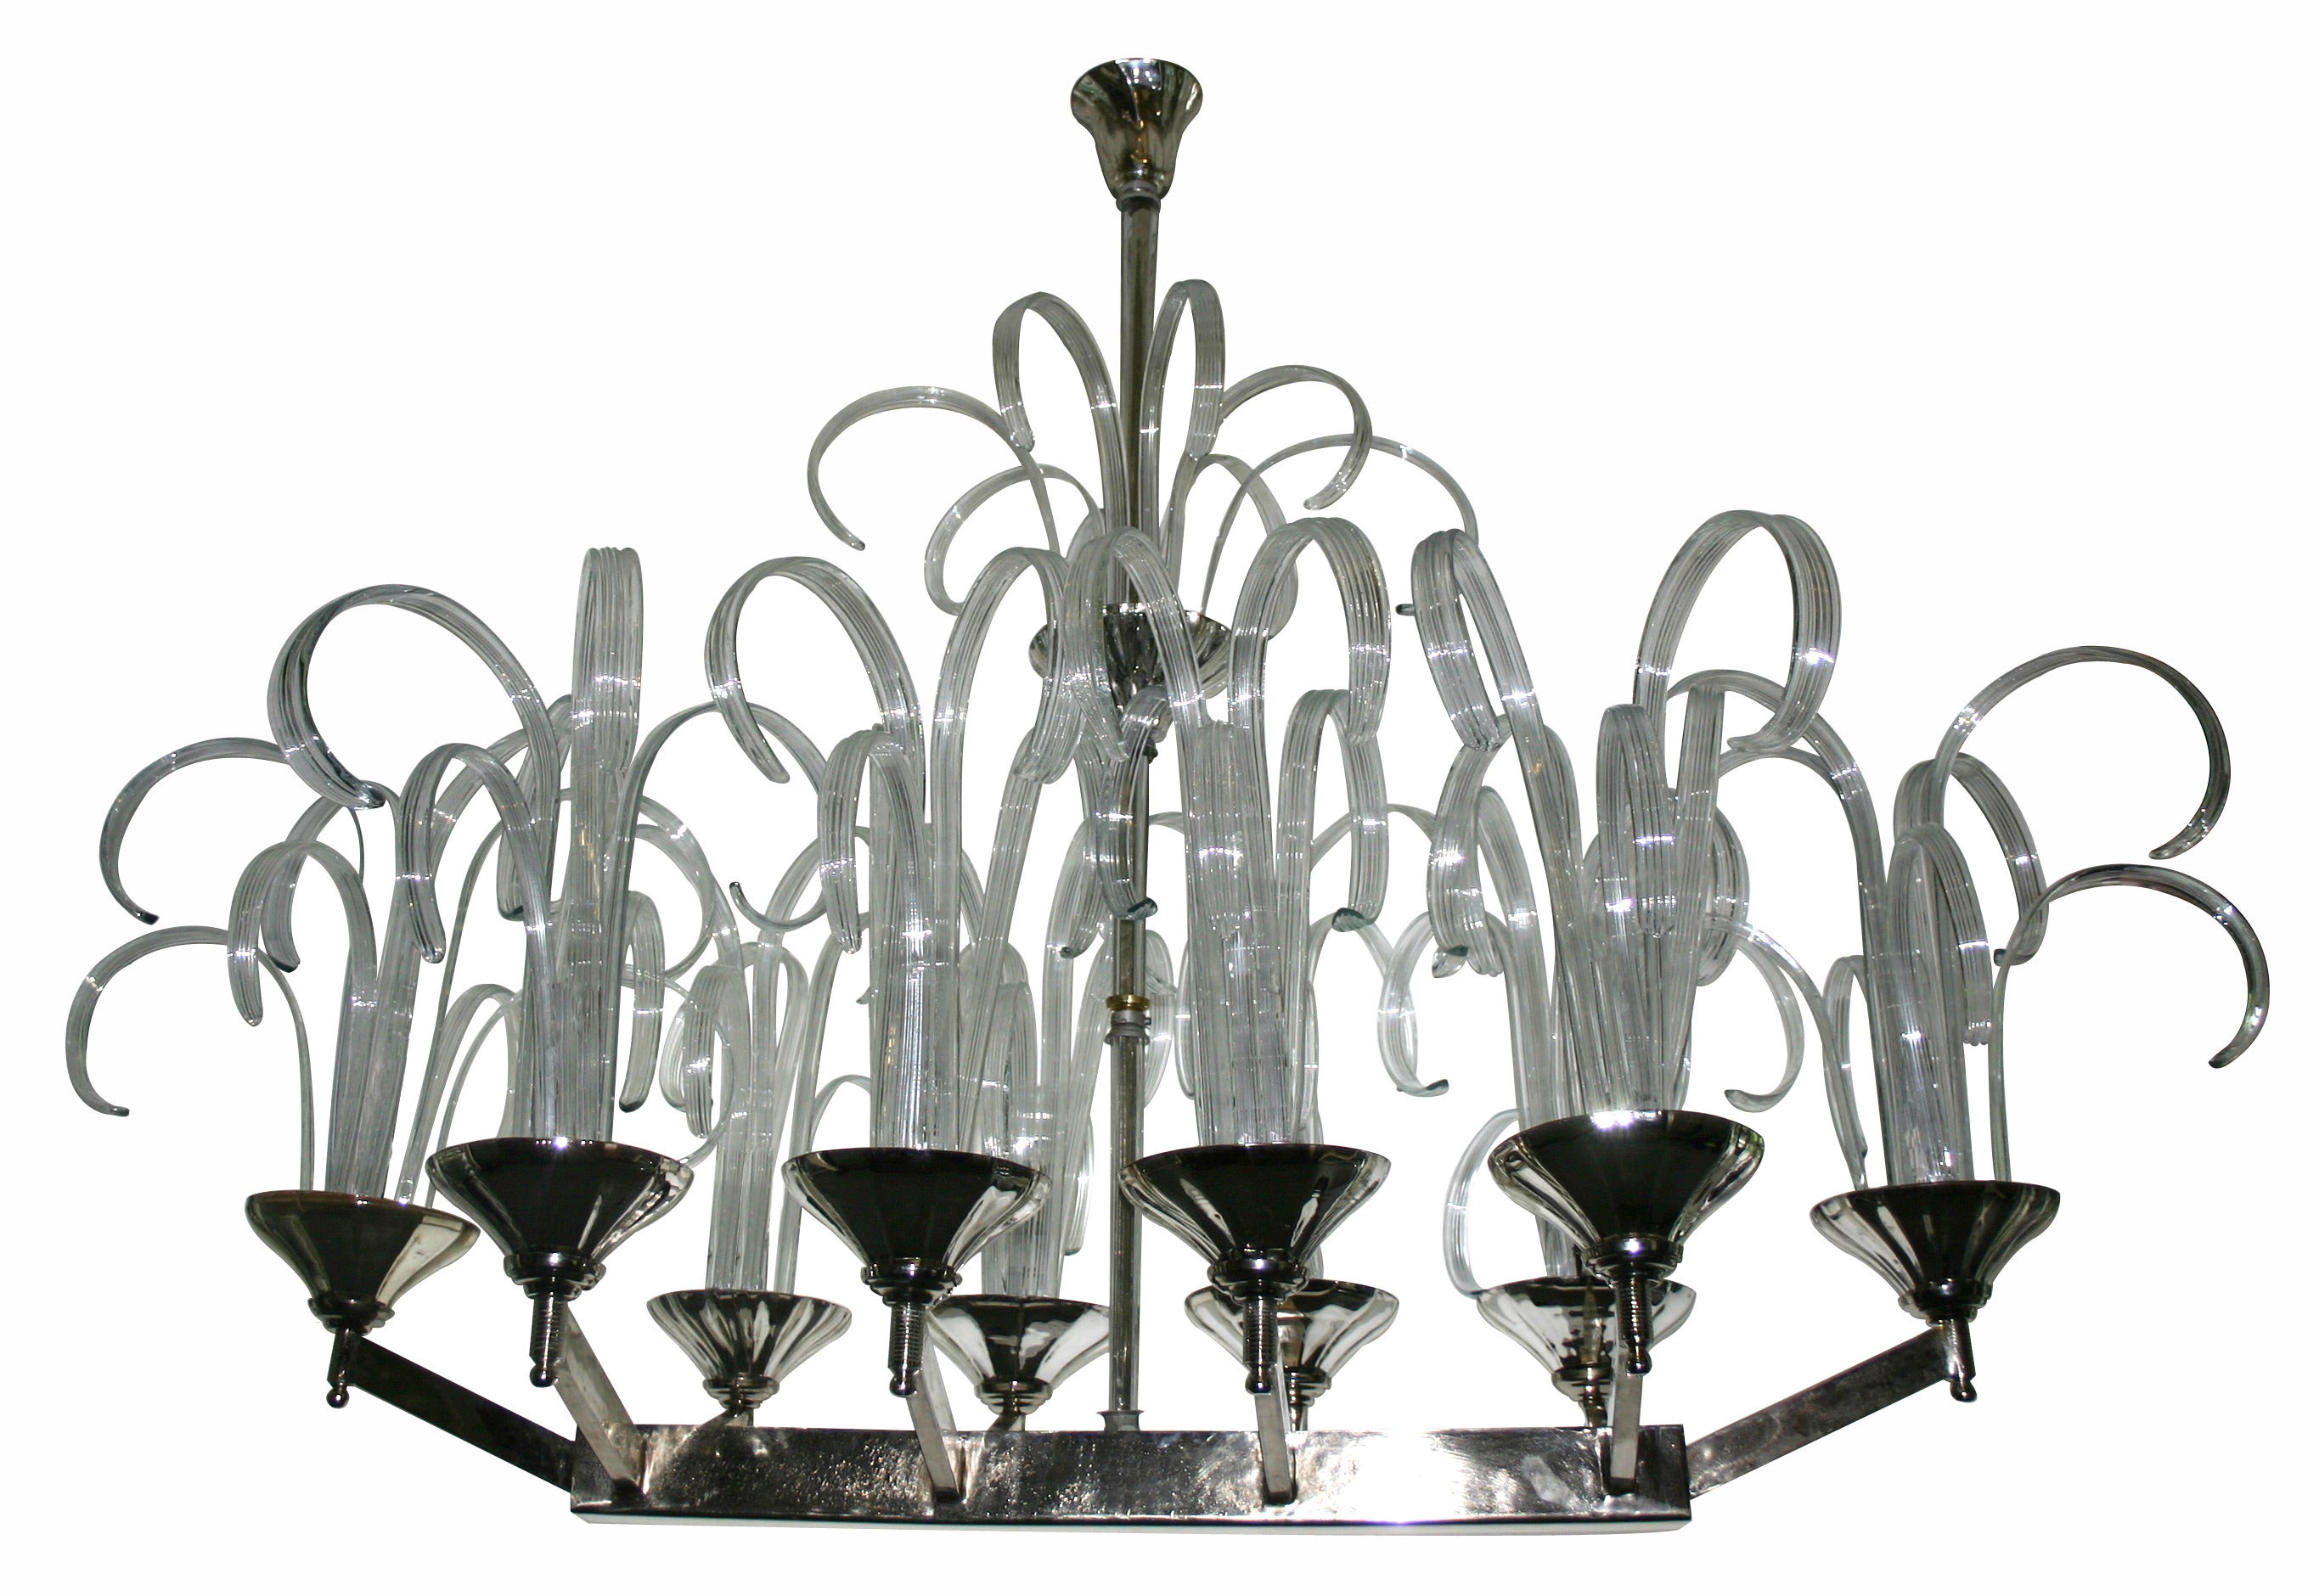 A large, circa 1960s Italian blown glass chandelier with ten-light. The arms with mercury glass bobeches and with clear glass insets. Silver plated body with original patina. Mercury glass bobeches.